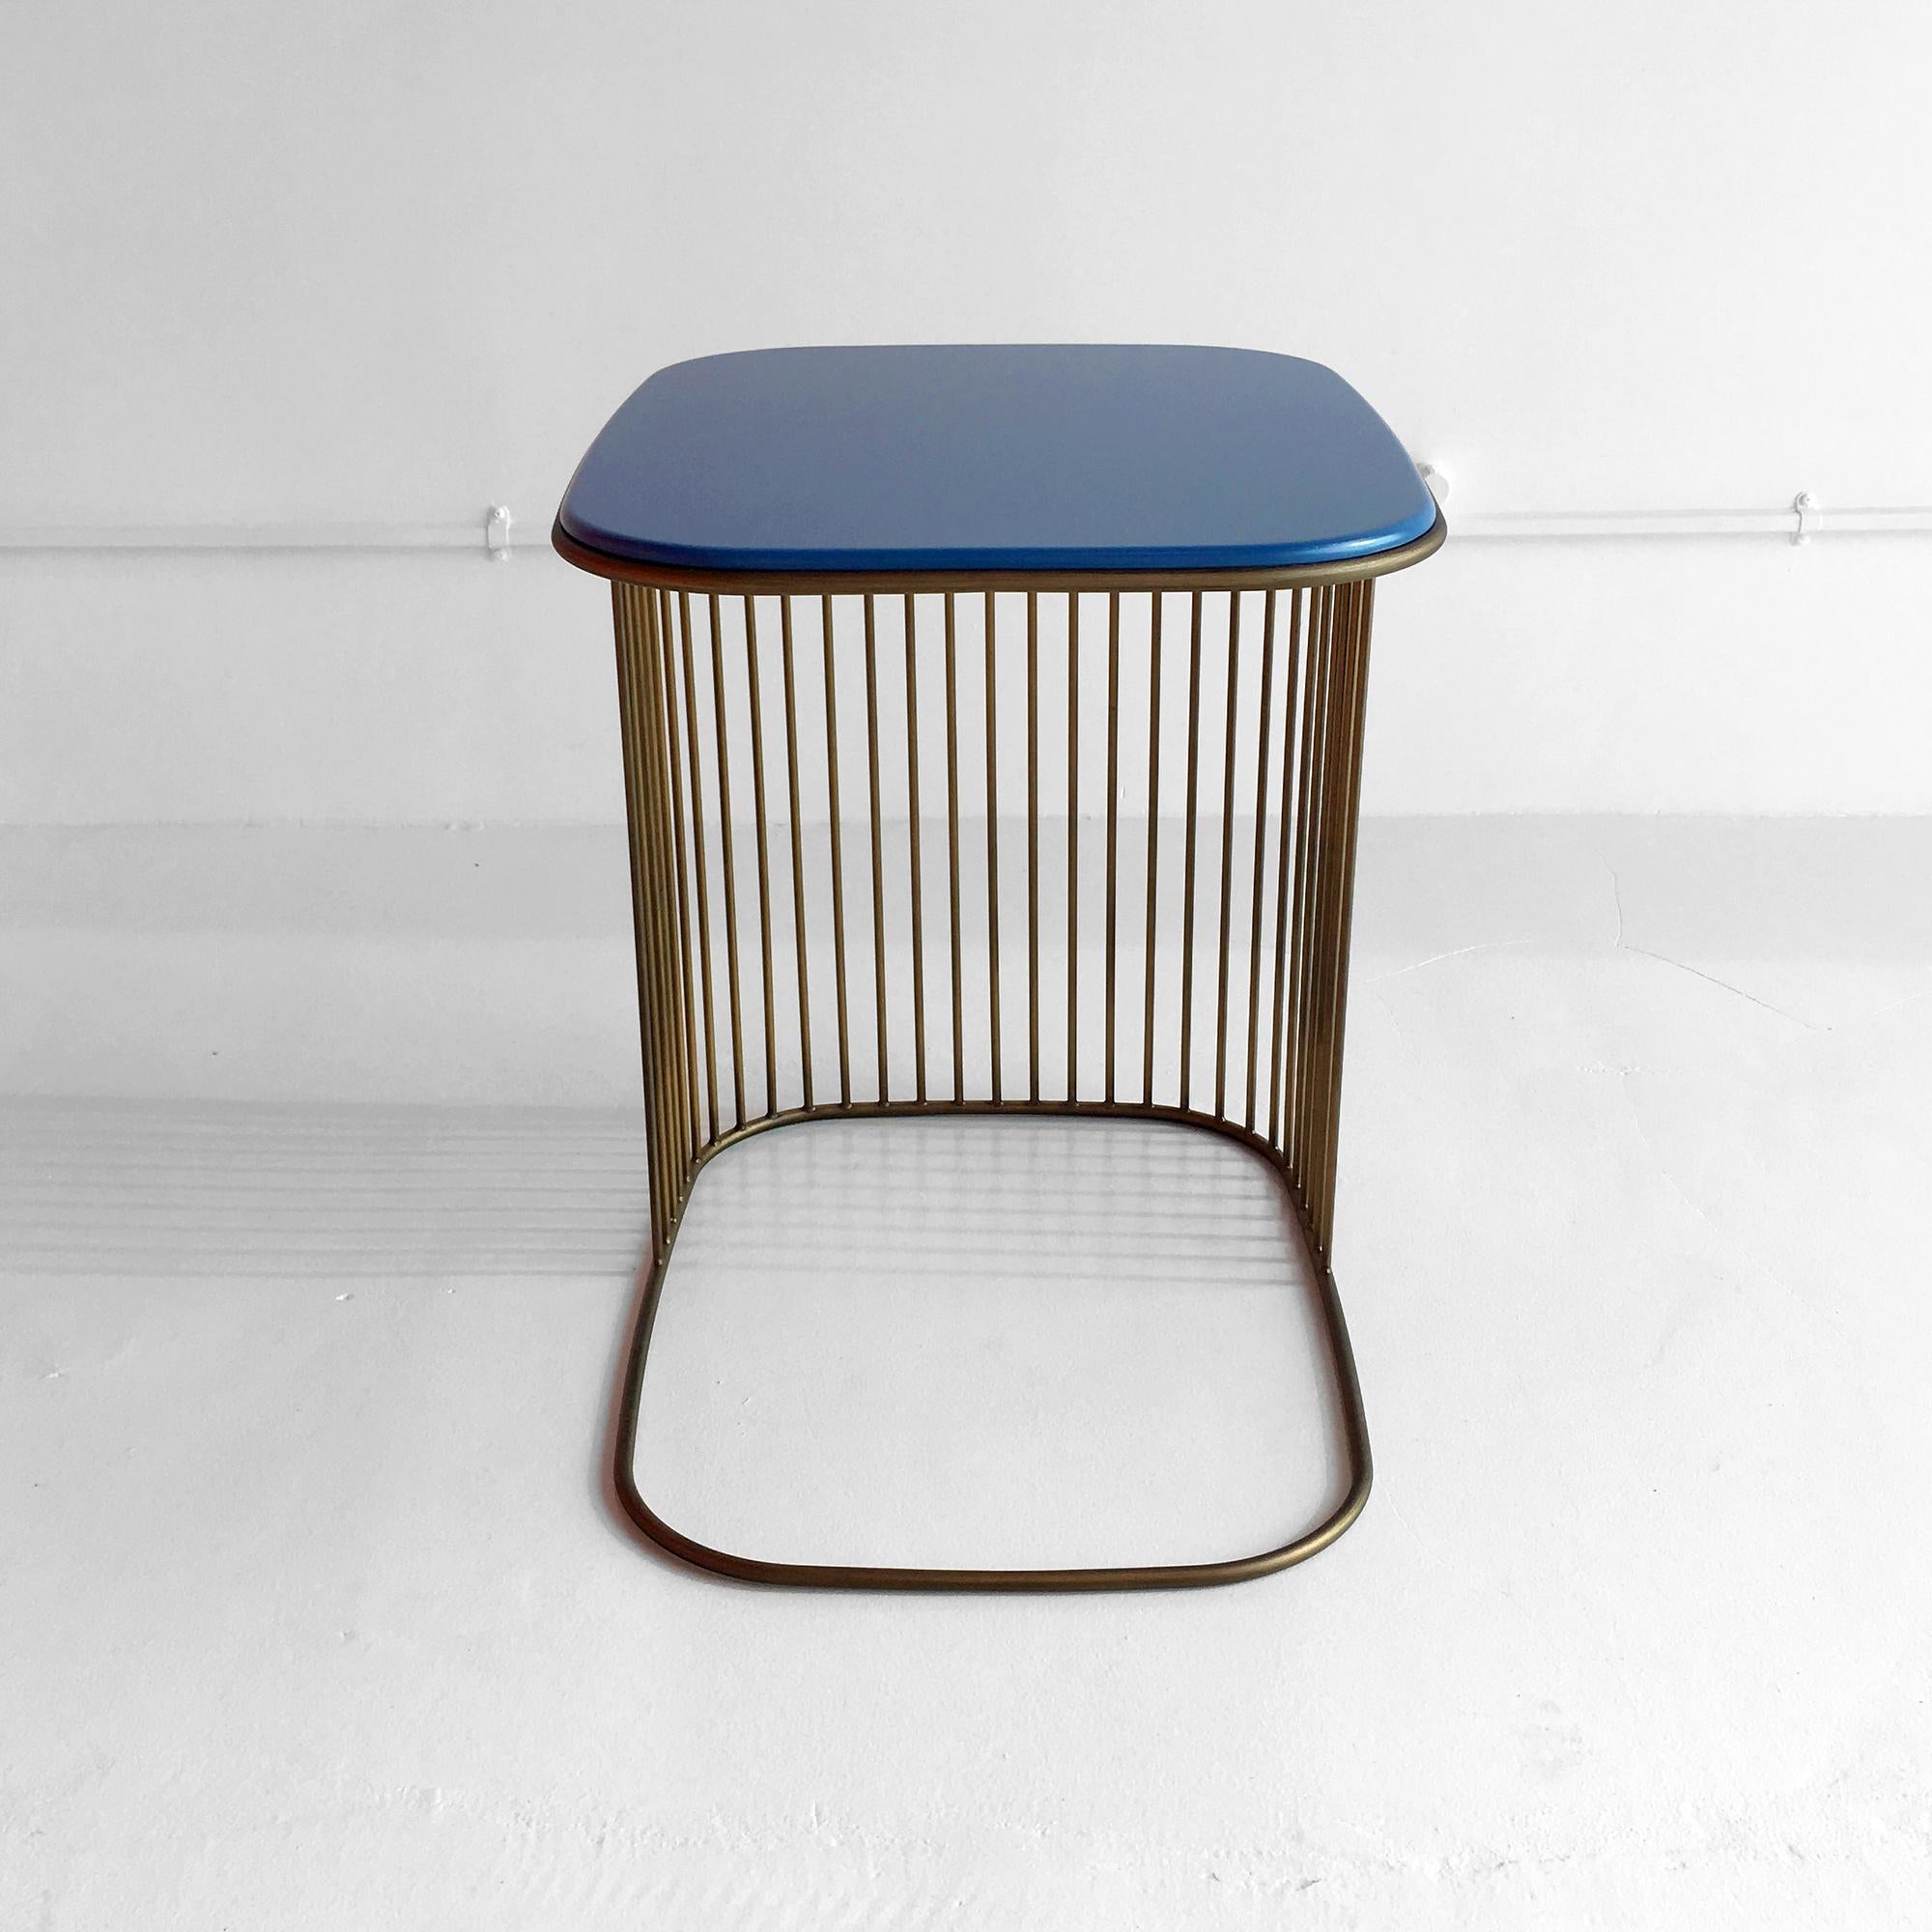 Italian In Stock in LA, Comb Blue Frame Side Table by Gordon Guillaumier, Made in Italy  For Sale